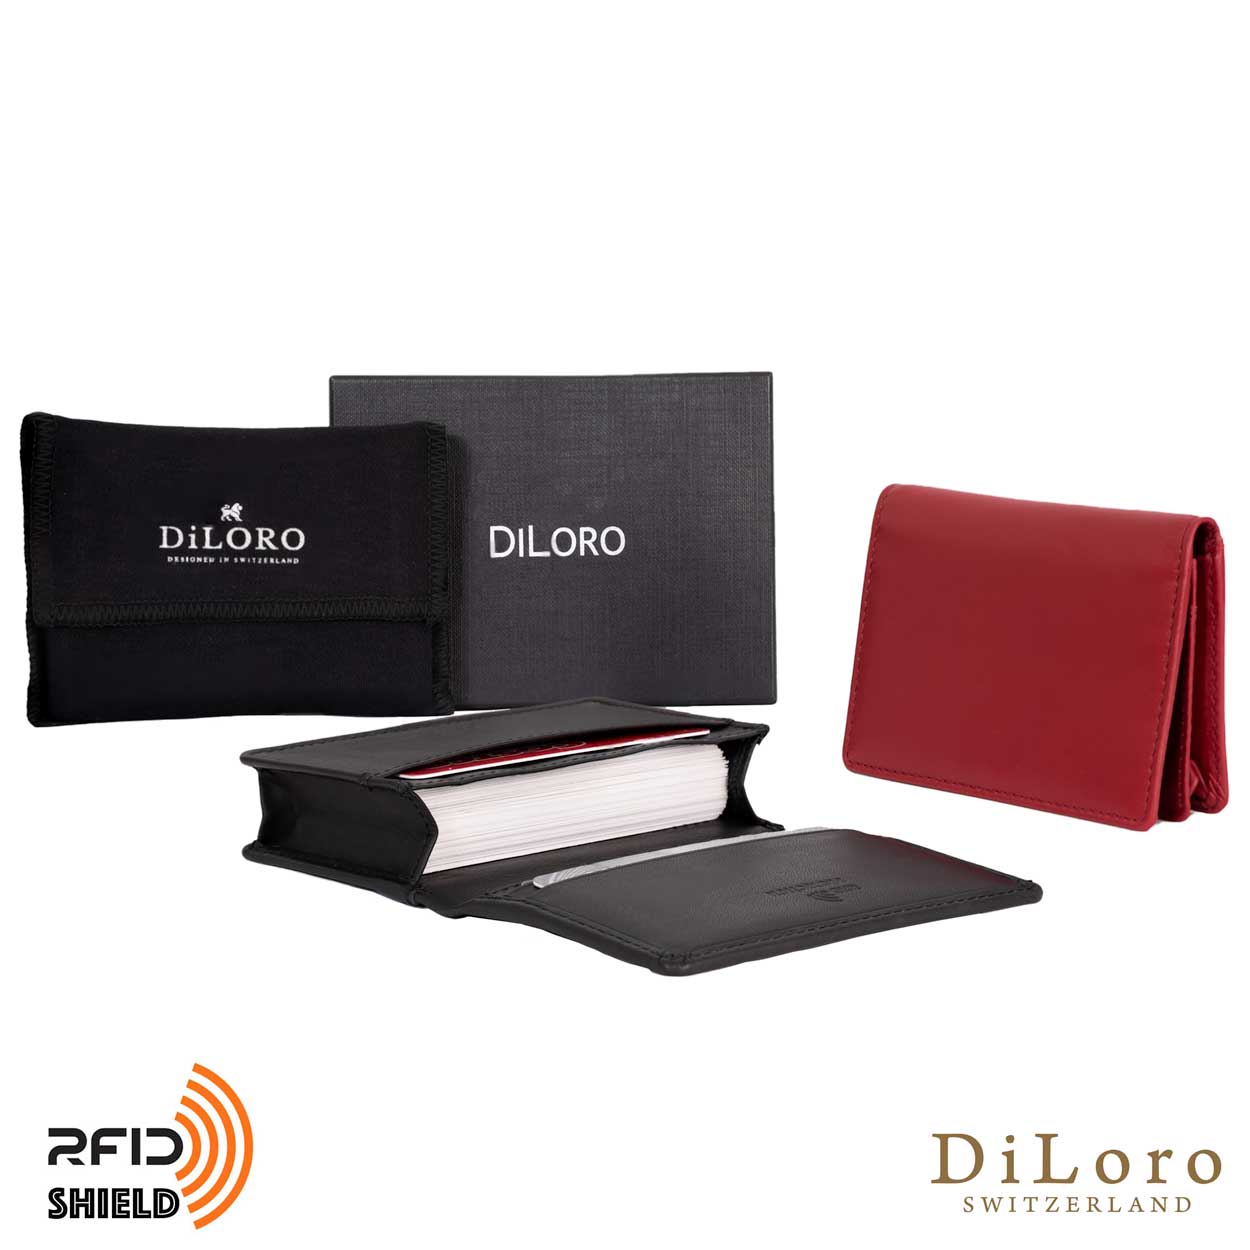 DiLoro Travel Leather Business Card Wallets - Black & Red with Gift Box and Dust Bag